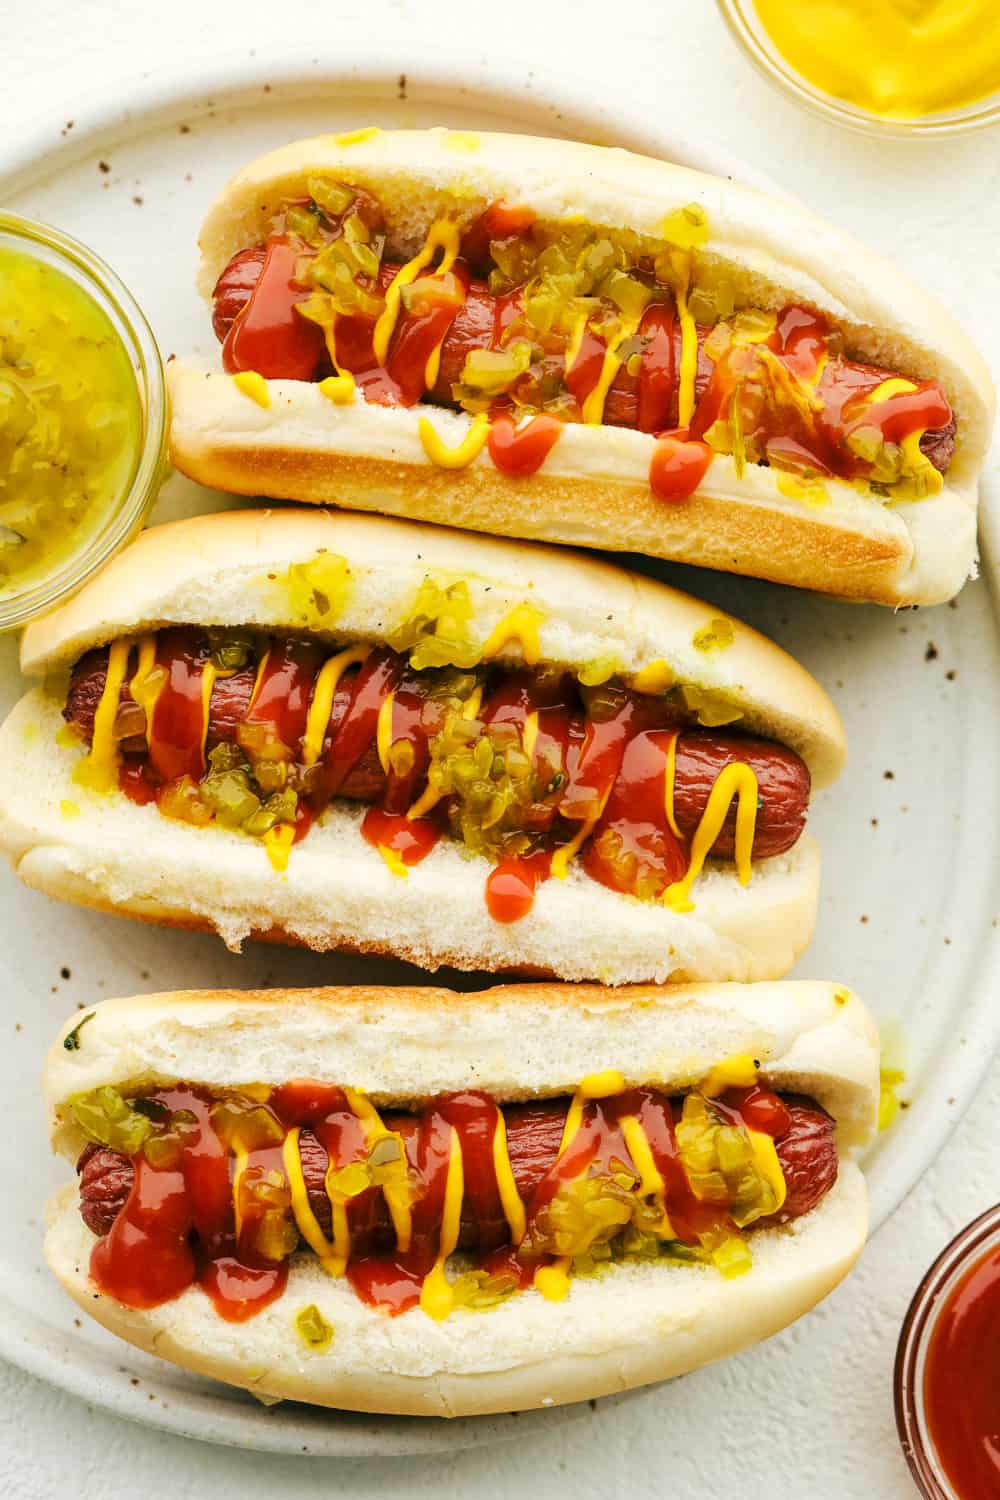 Air fryer hot dogs in a bun with mustard, ketchup and relish on a plate. 